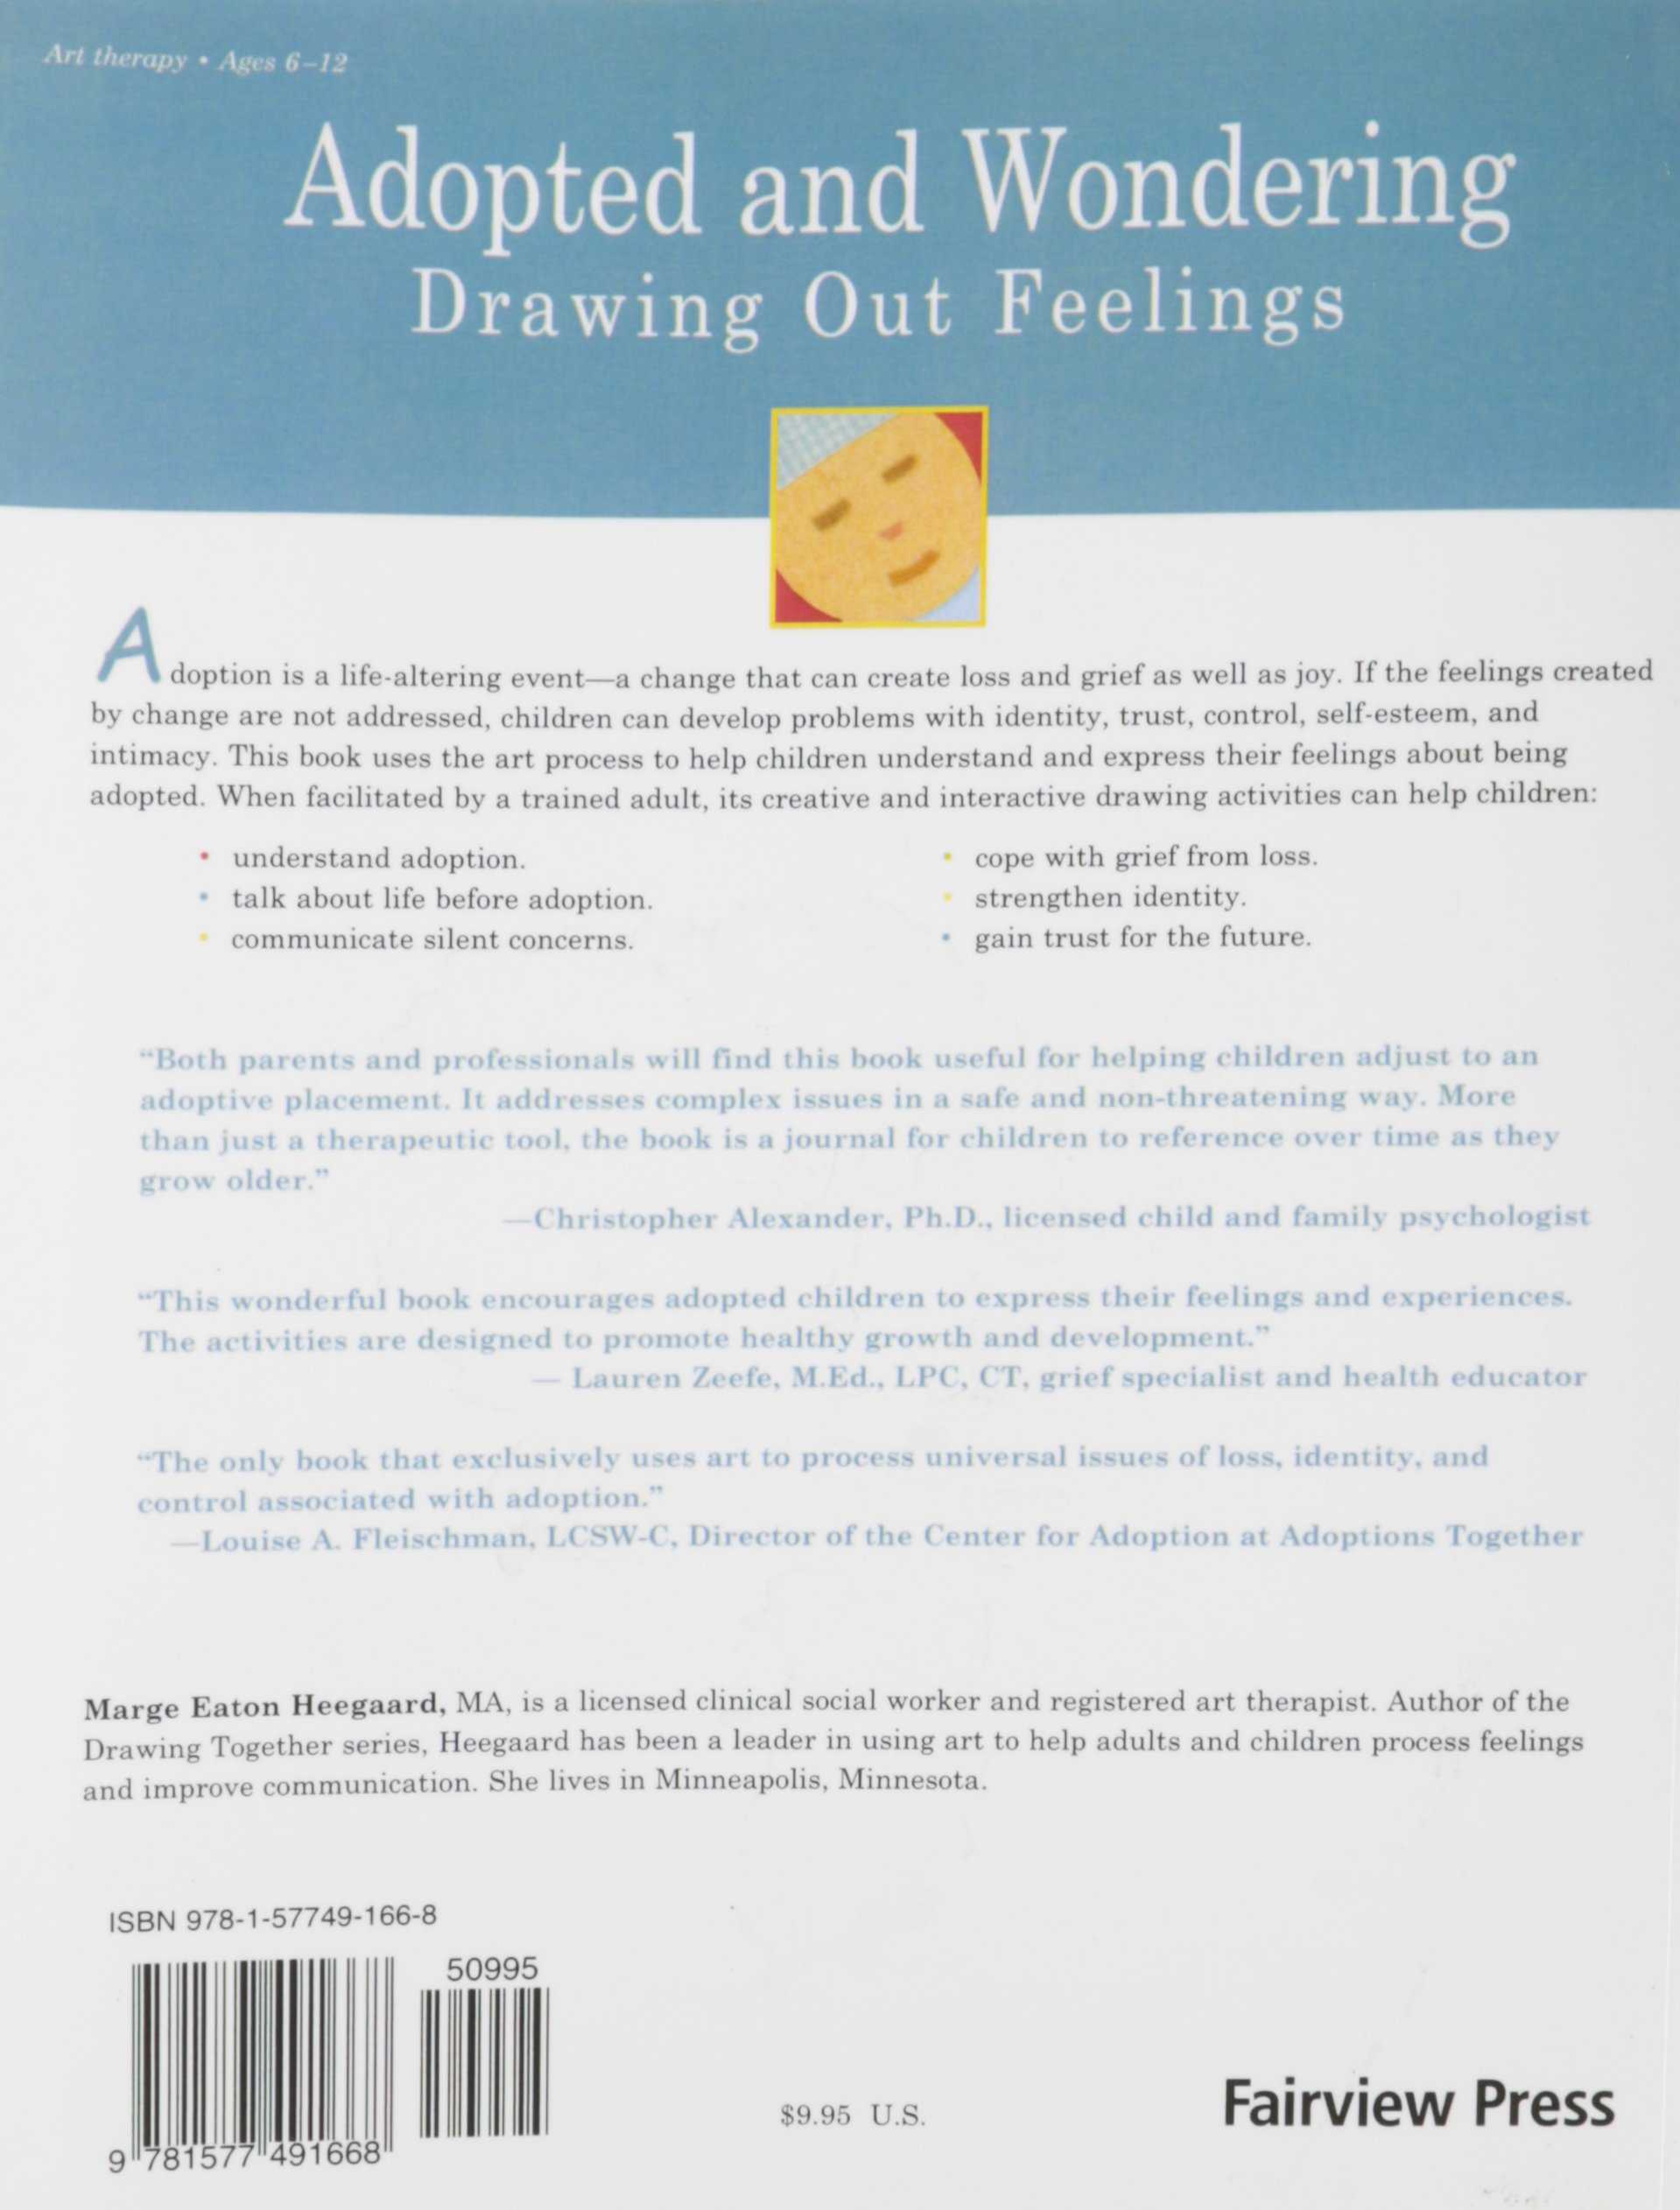 Grief and Loss Worksheets for Adults together with Adopted and Wondering Drawing Out Feelings Marge Eaton Heegaard